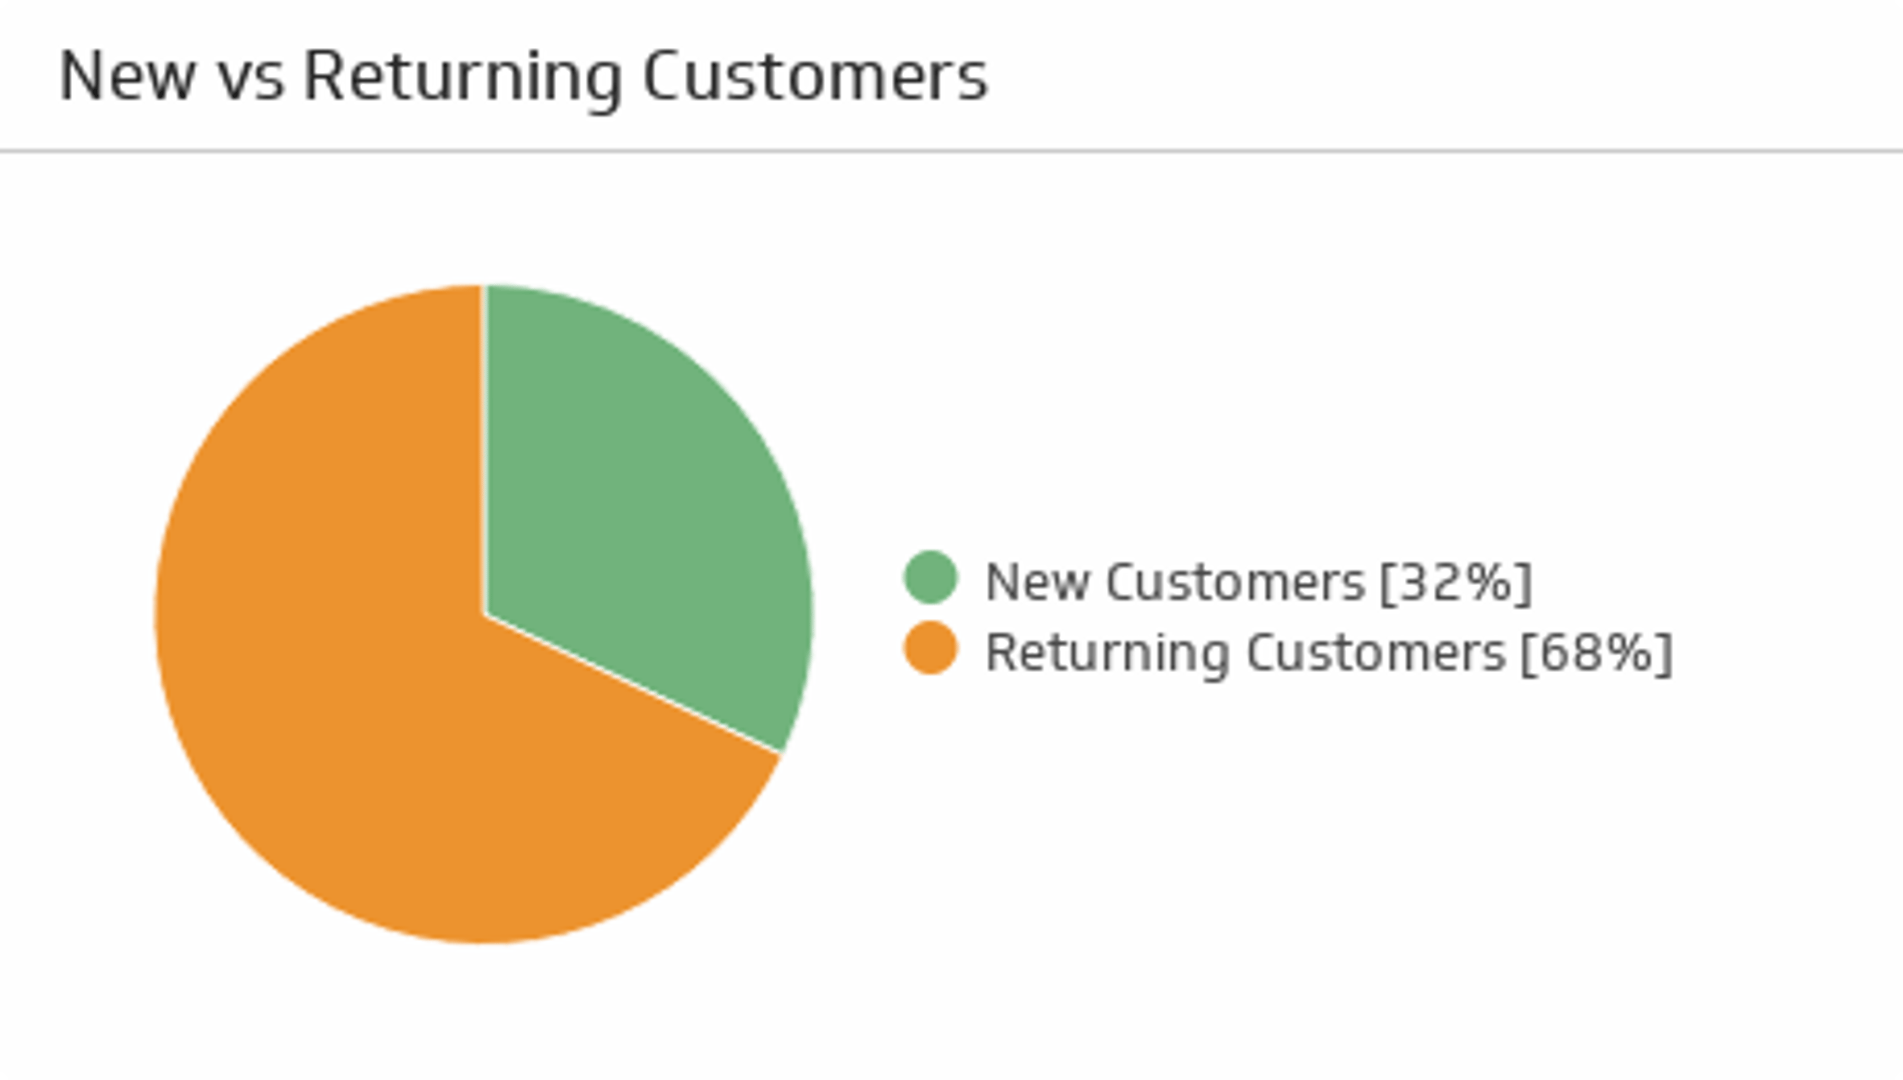 Related KPI Examples - New Customers Metric